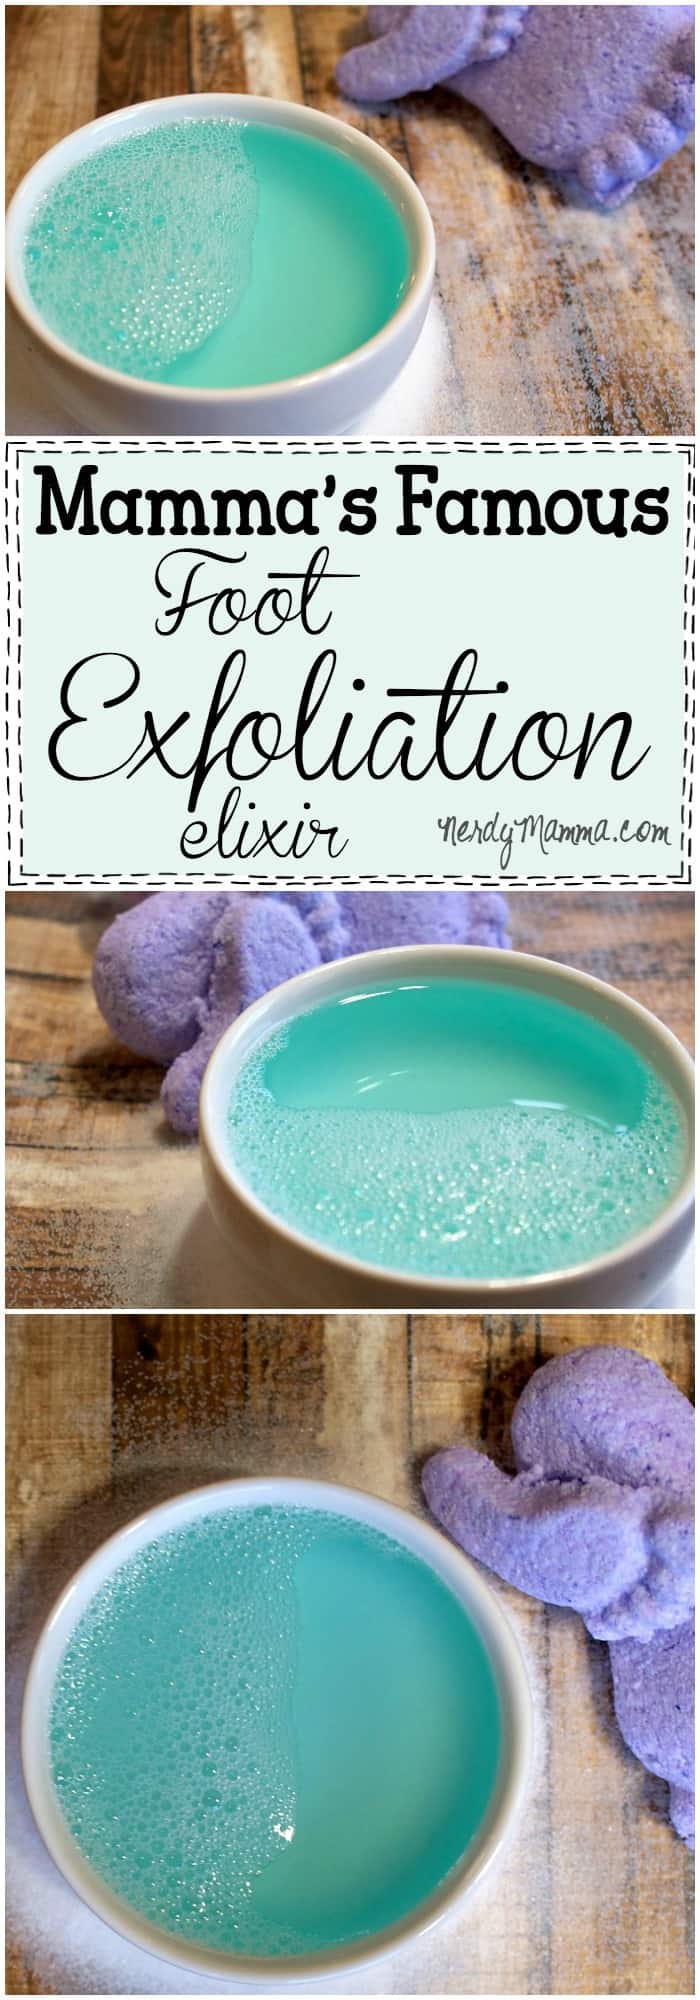 This is such an awesome recipe for an easy way to remove dead skin from your feet. I LOVE it. Mamma's Famous Foot Exfoliation Elixir. So silly, but it really works